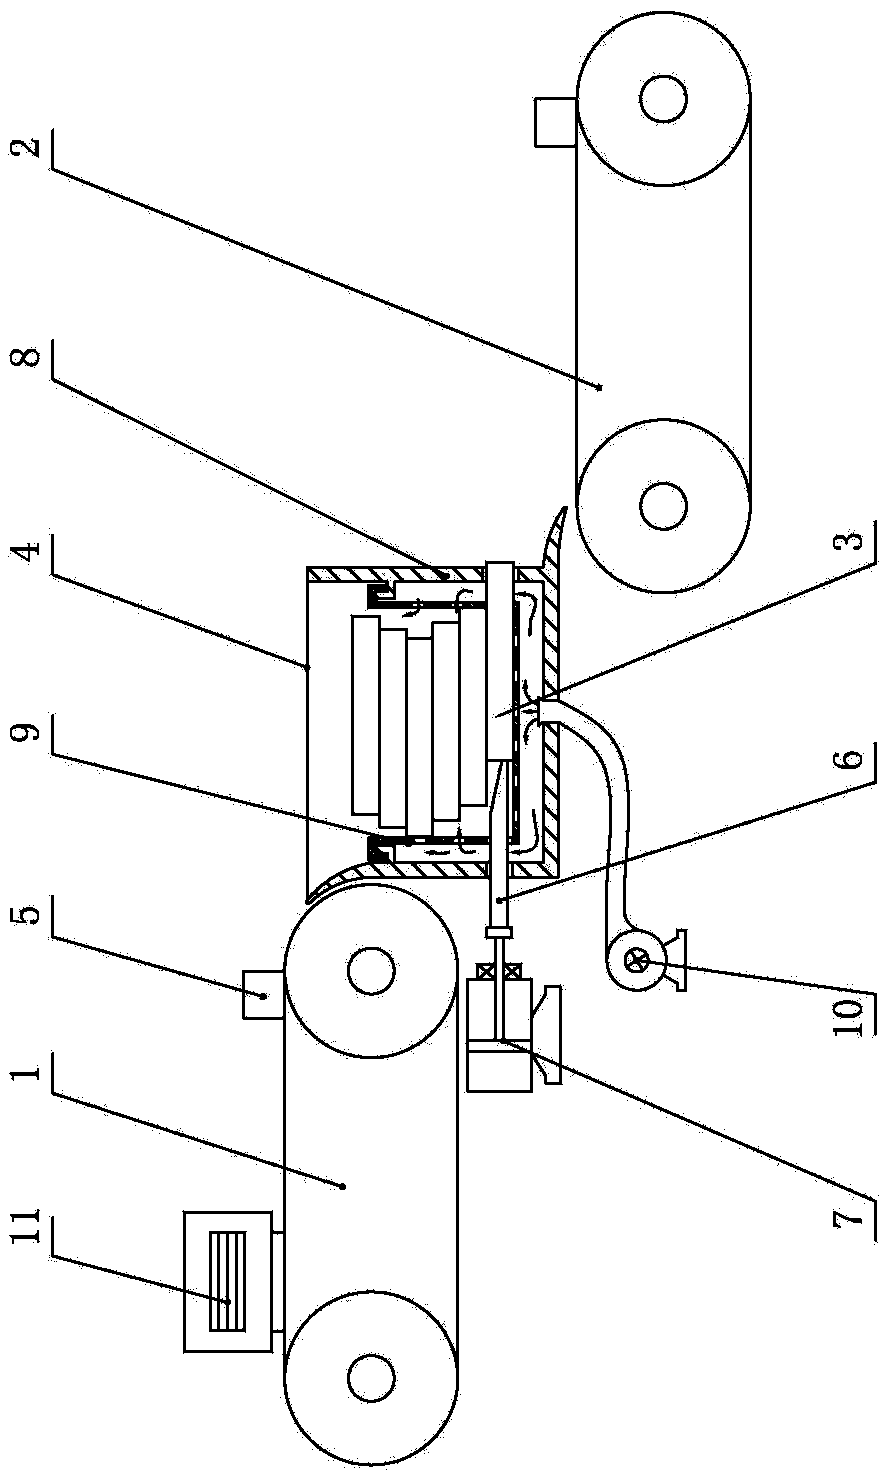 Connection table for cooling hold-up tank with PCB